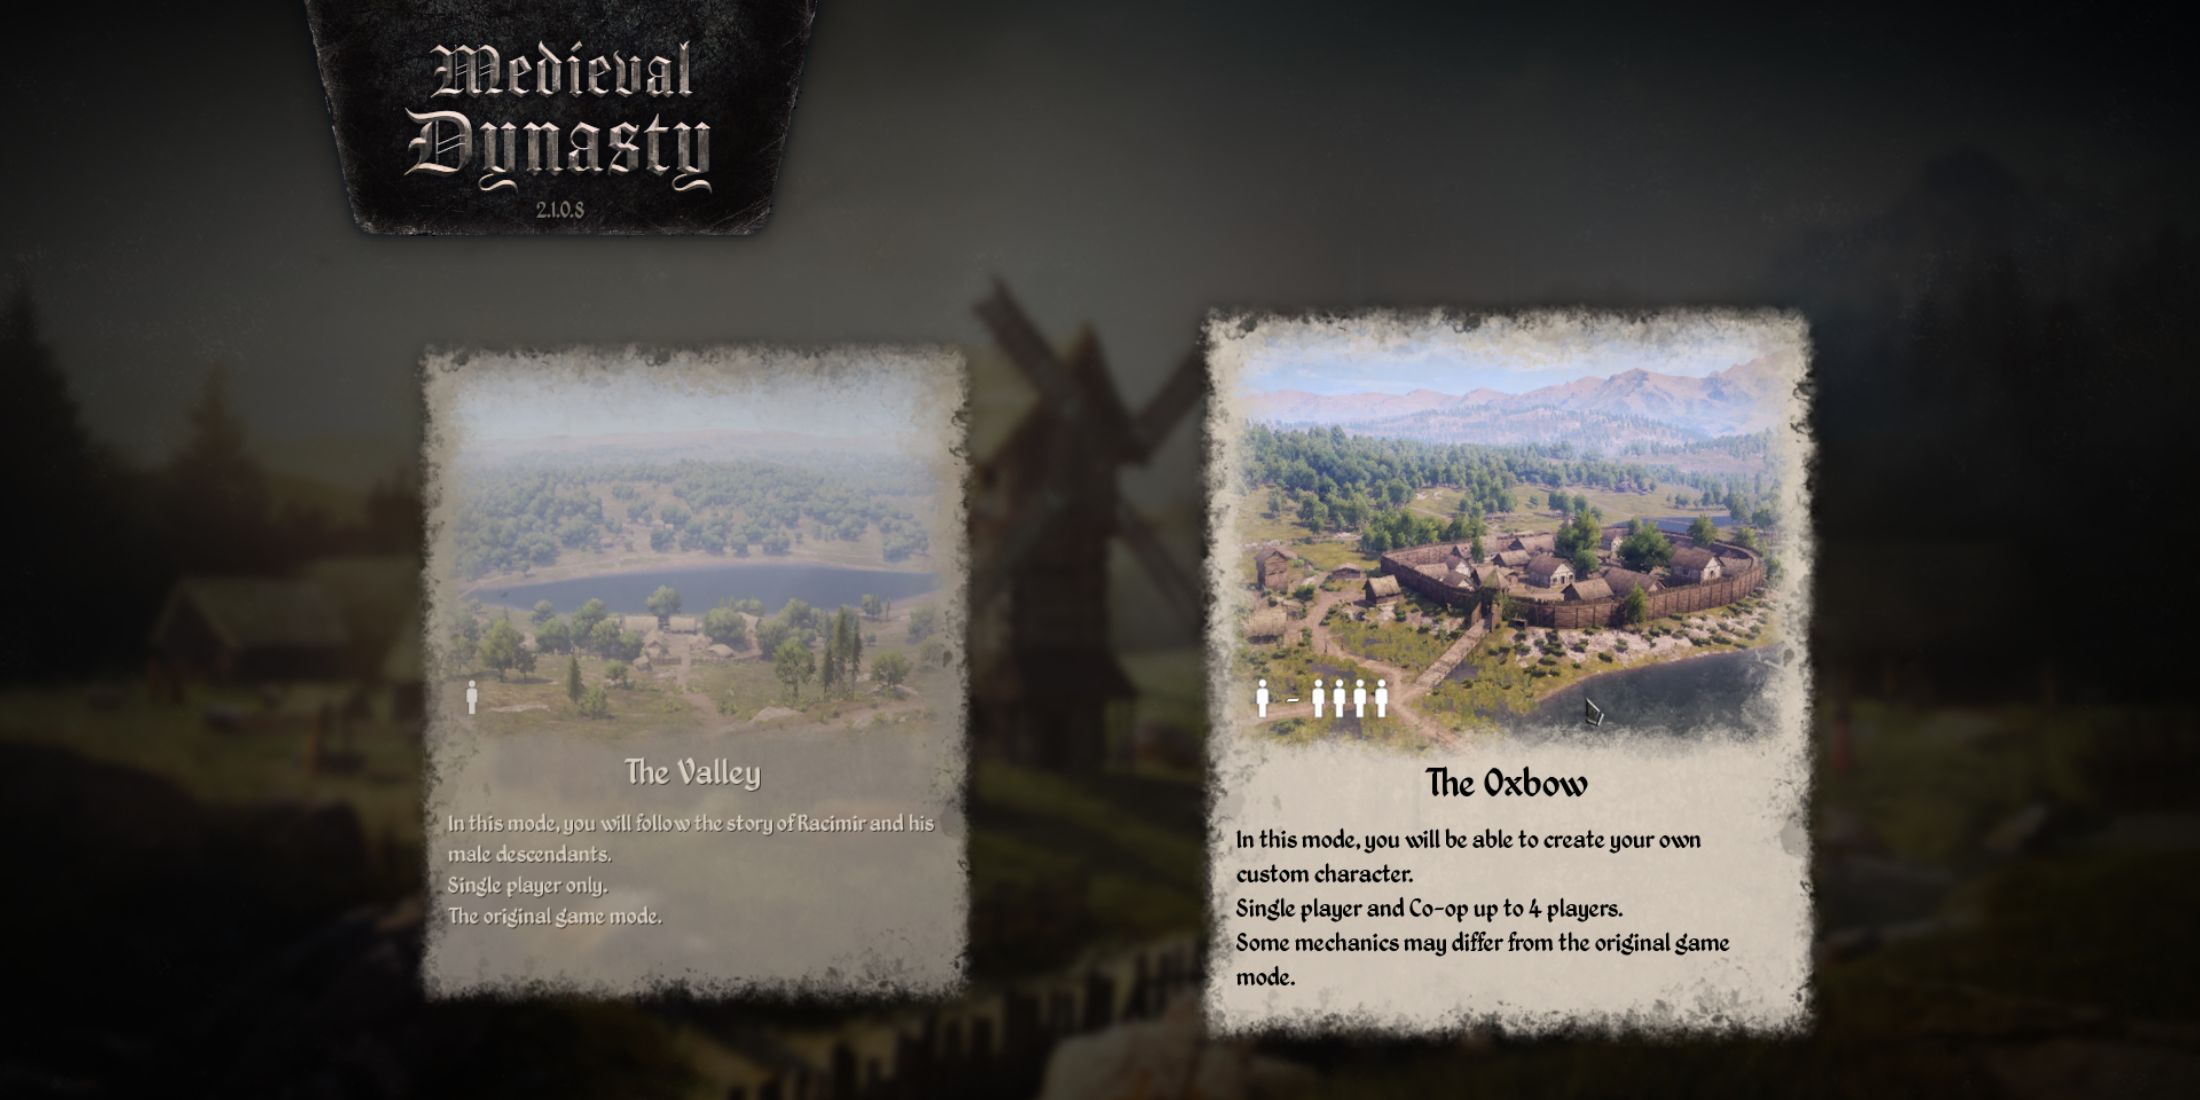 The game selection menu from Medieval Dynasty